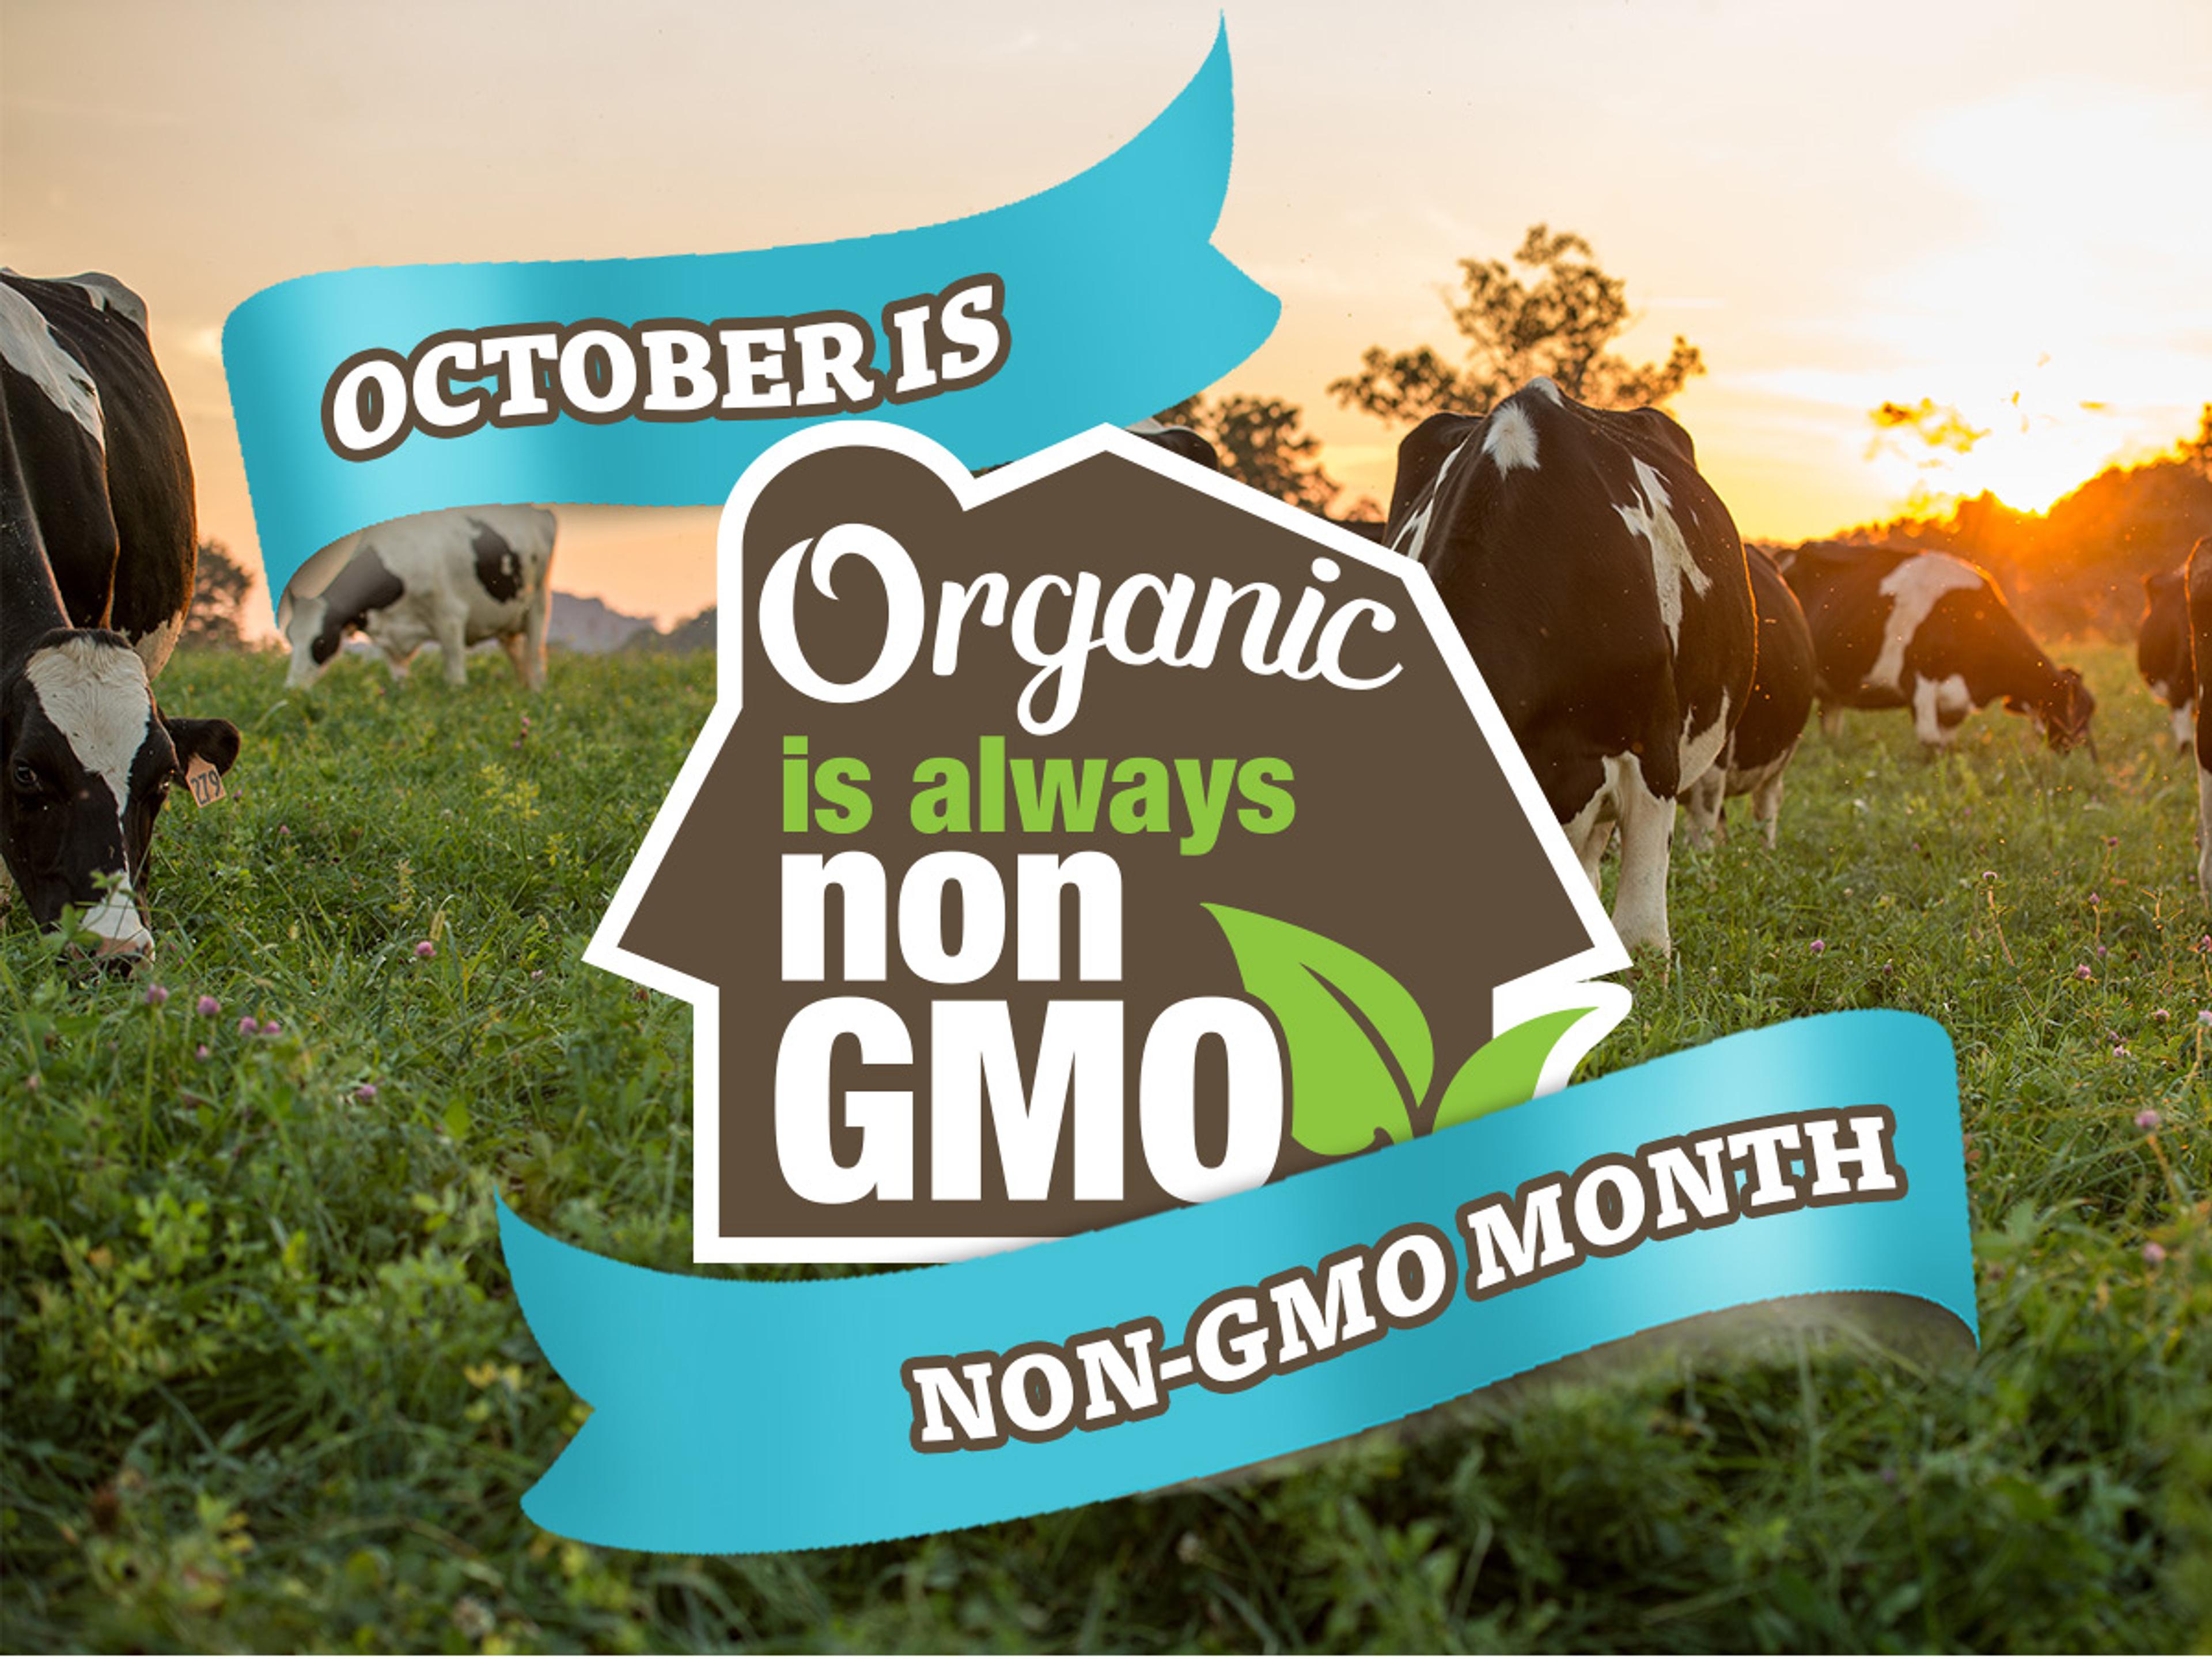 October is Non-GMO month.